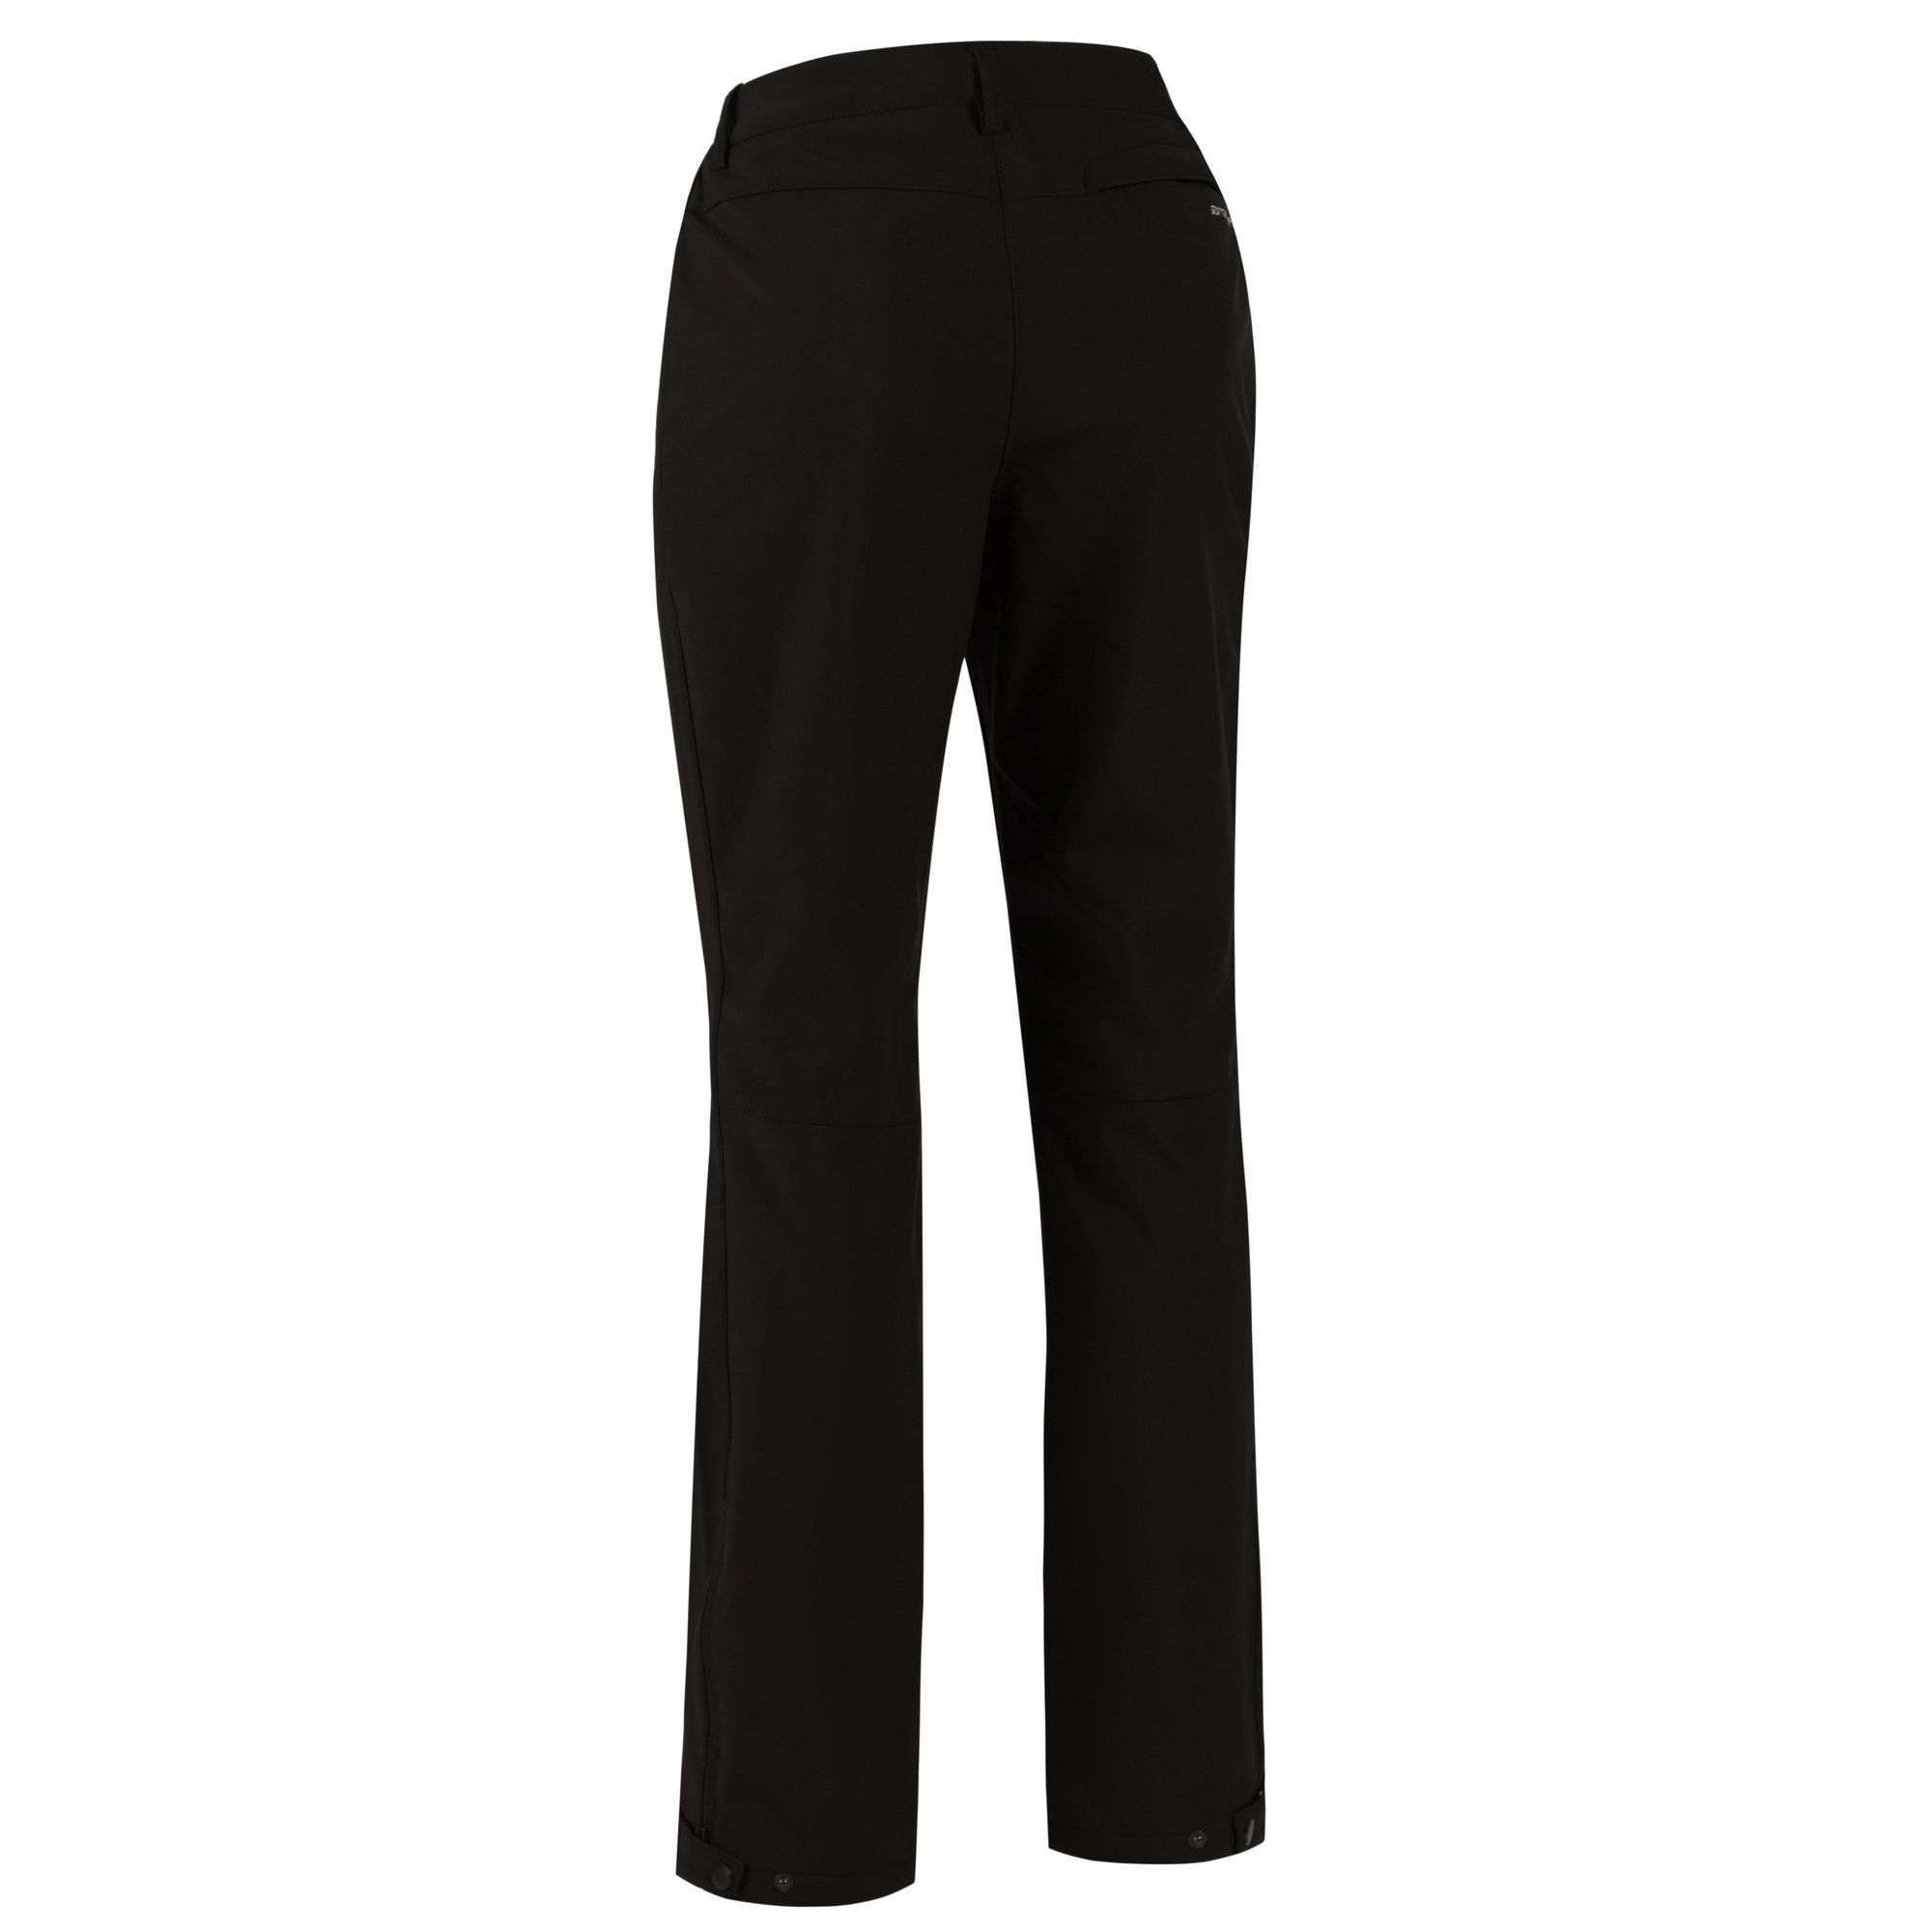 The womens Geo Softshell XPT II Trousers use a breathable, wind resistant membrane with a DWR (Durable Water Repellent) finish for maximum comfort on demanding days. They stave off showers and gales and keep you warm while allowing superb mobility. Packed with handy pockets and part elastic at the waist for comfort as you move, they have proven to be a best-selling performance trousers year-on-year. Leg length - 33ins. Regatta Womens sizing (waist approx): 6 (23in/58cm), 8 (25in/63cm), 10 (27in/68cm), 12 (29in/74cm), 14 (31in/79cm), 16 (33in/84cm), 18 (36in/91cm), 20 (38in/96cm), 22 (41in/104cm), 24 (43in/109cm), 26 (45in/114cm), 28 (47in/119cm), 30 (49in/124cm), 32 (51in/129cm), 34 (53in/135cm), 36 (55in/140cm). 15% Elastane, 85% Polyamide.